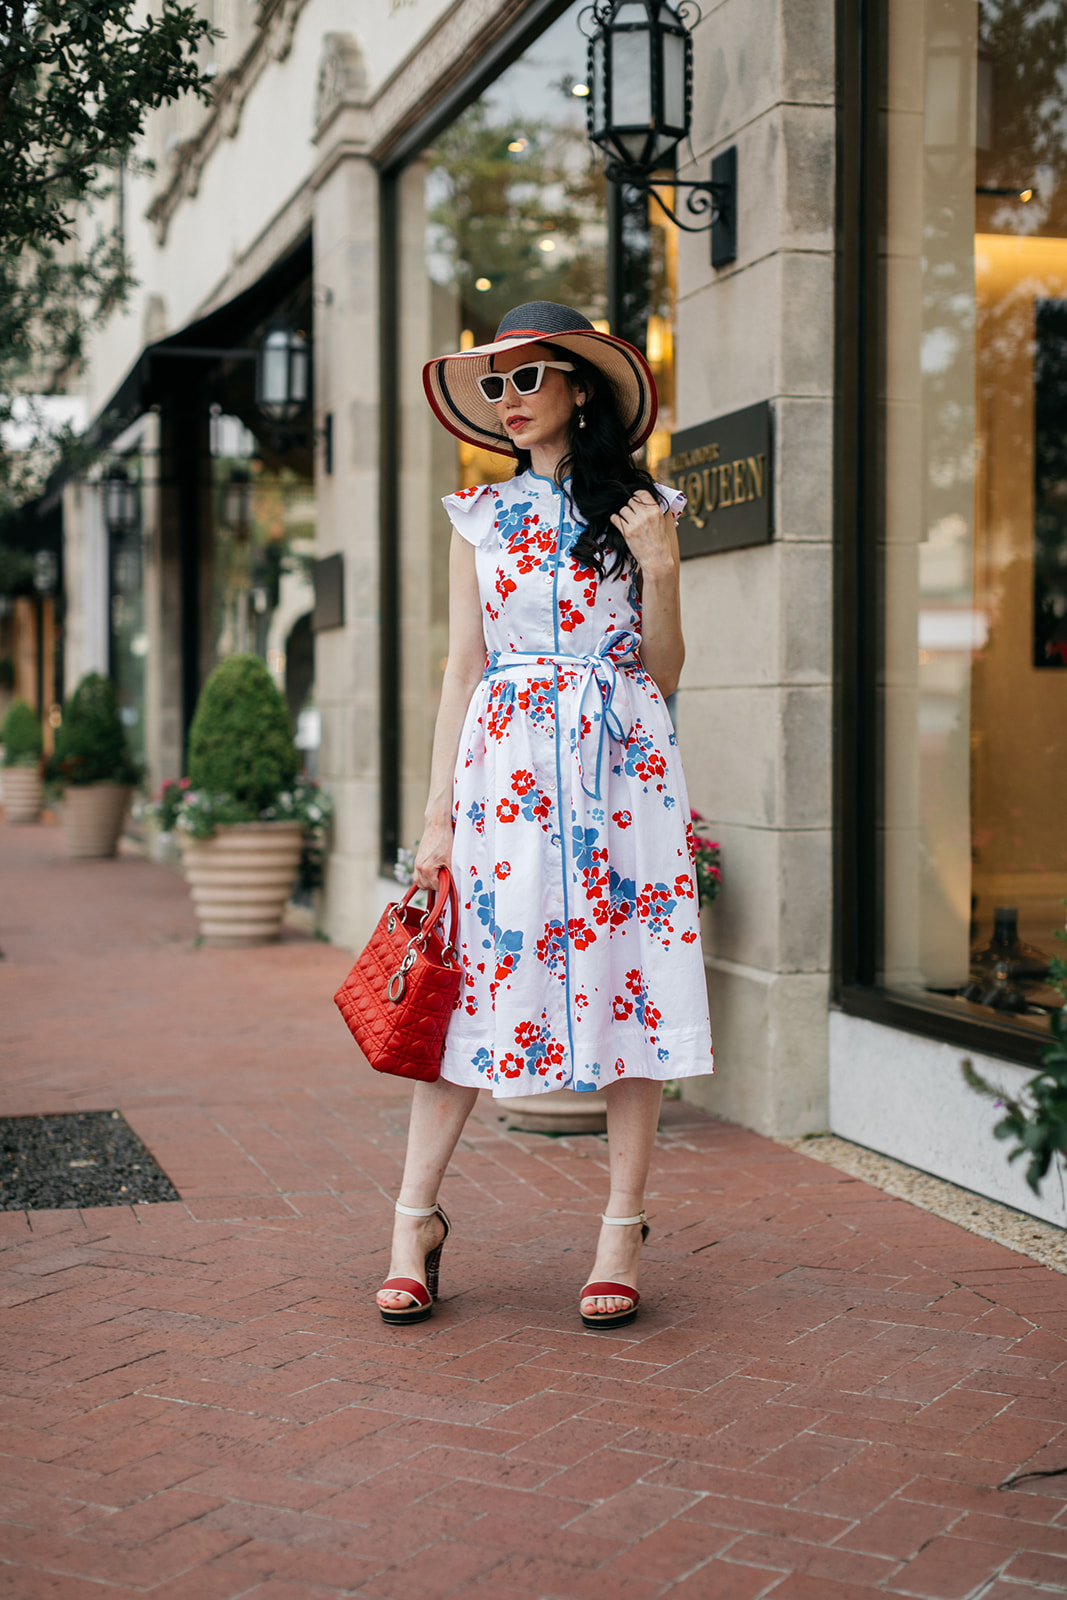 Brooks Brothers Shirt Dress, Tommy Hilfiger Sunhat and Sandals, Lady Dior Bag, Dallas Fashion Blogger | Brooks Brothers Shirt Dress by popular Dallas fashion blog, Pretty Little Shoppers: image of a woman walking in  Highland Park Village and wearing a red, whites and blue Brooks Brothers shirt dress, white frame sunglasses, and wearing a red and black stripe straw hat while holding a red handbag. 